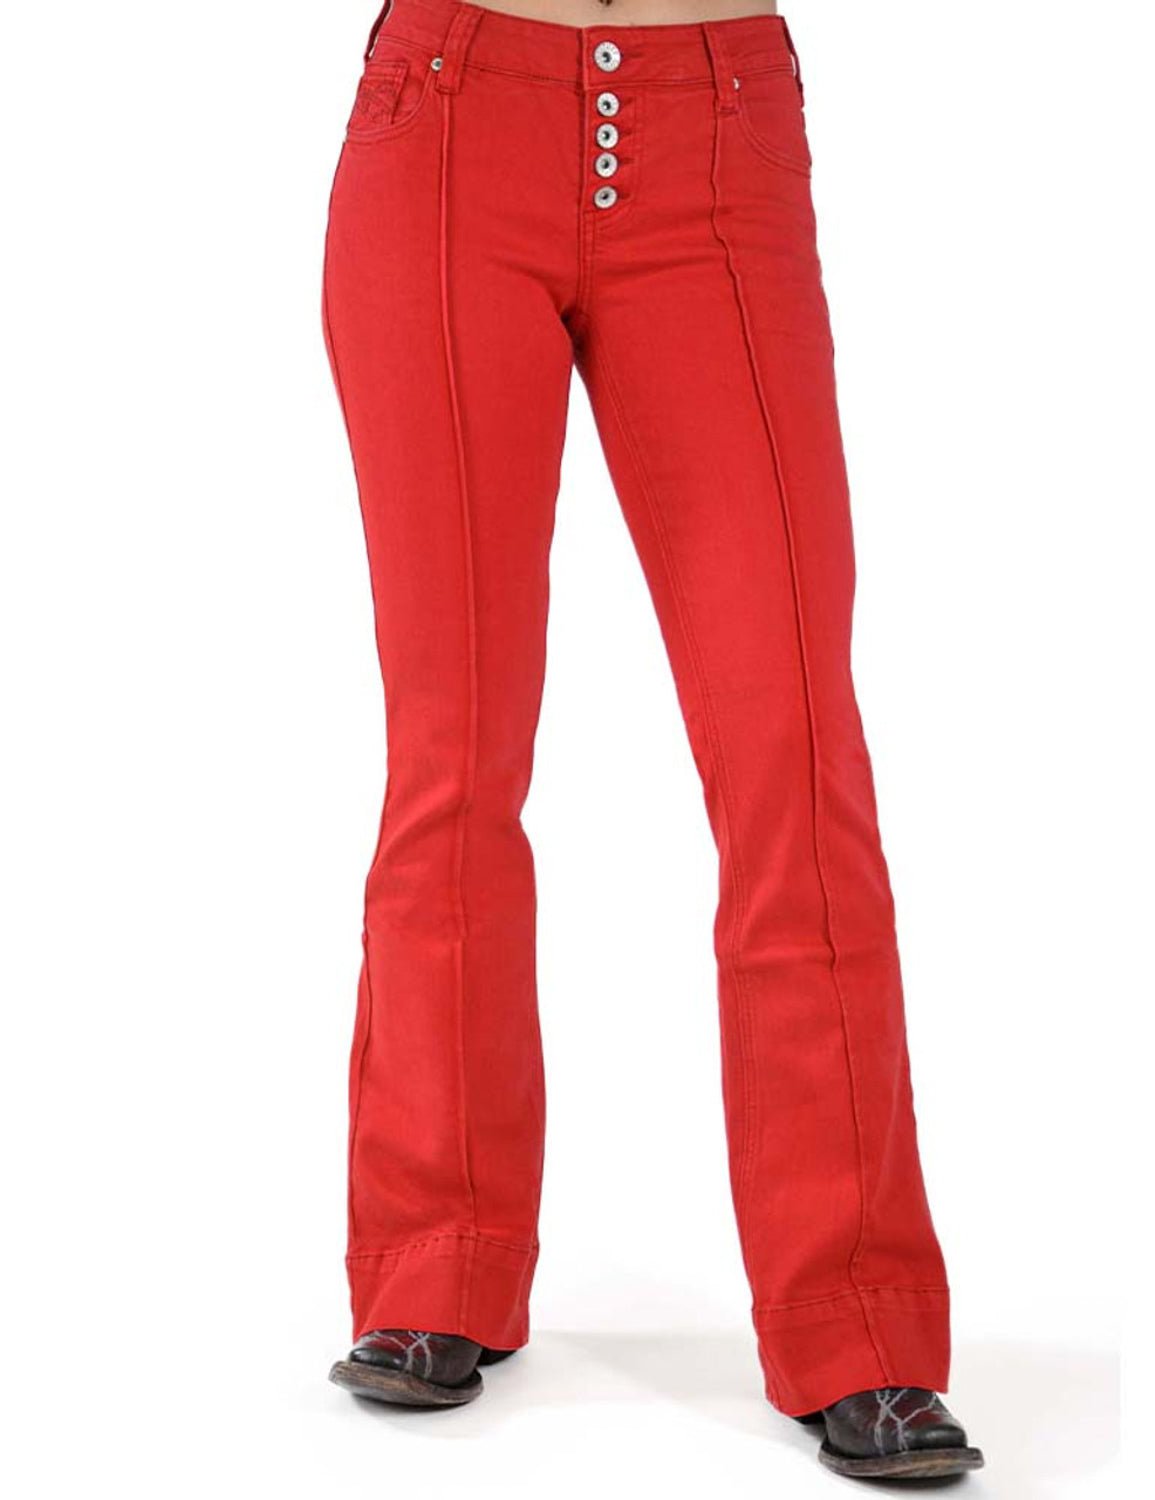 Cowgirl Tuff Womens Hot Trouser Red Cotton Blend Jeans The Western Company